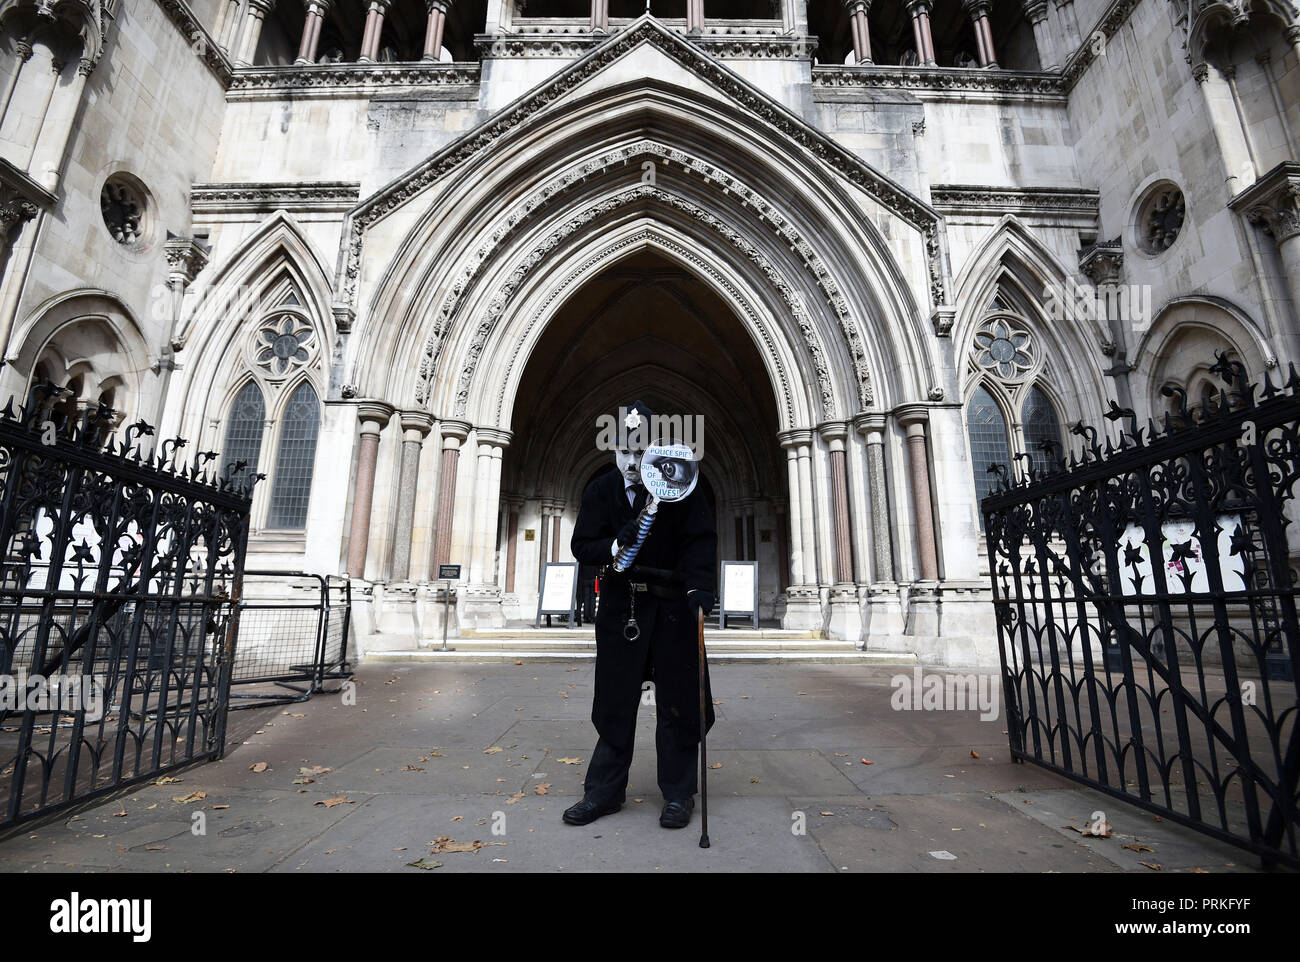 A demonstrator outside the Royal Courts of Justice, London, where an Investigatory Powers Tribunal is hearing the case of Kate Wilson who was deceived into a relationship by undercover police officer Mark Kennedy. Stock Photo